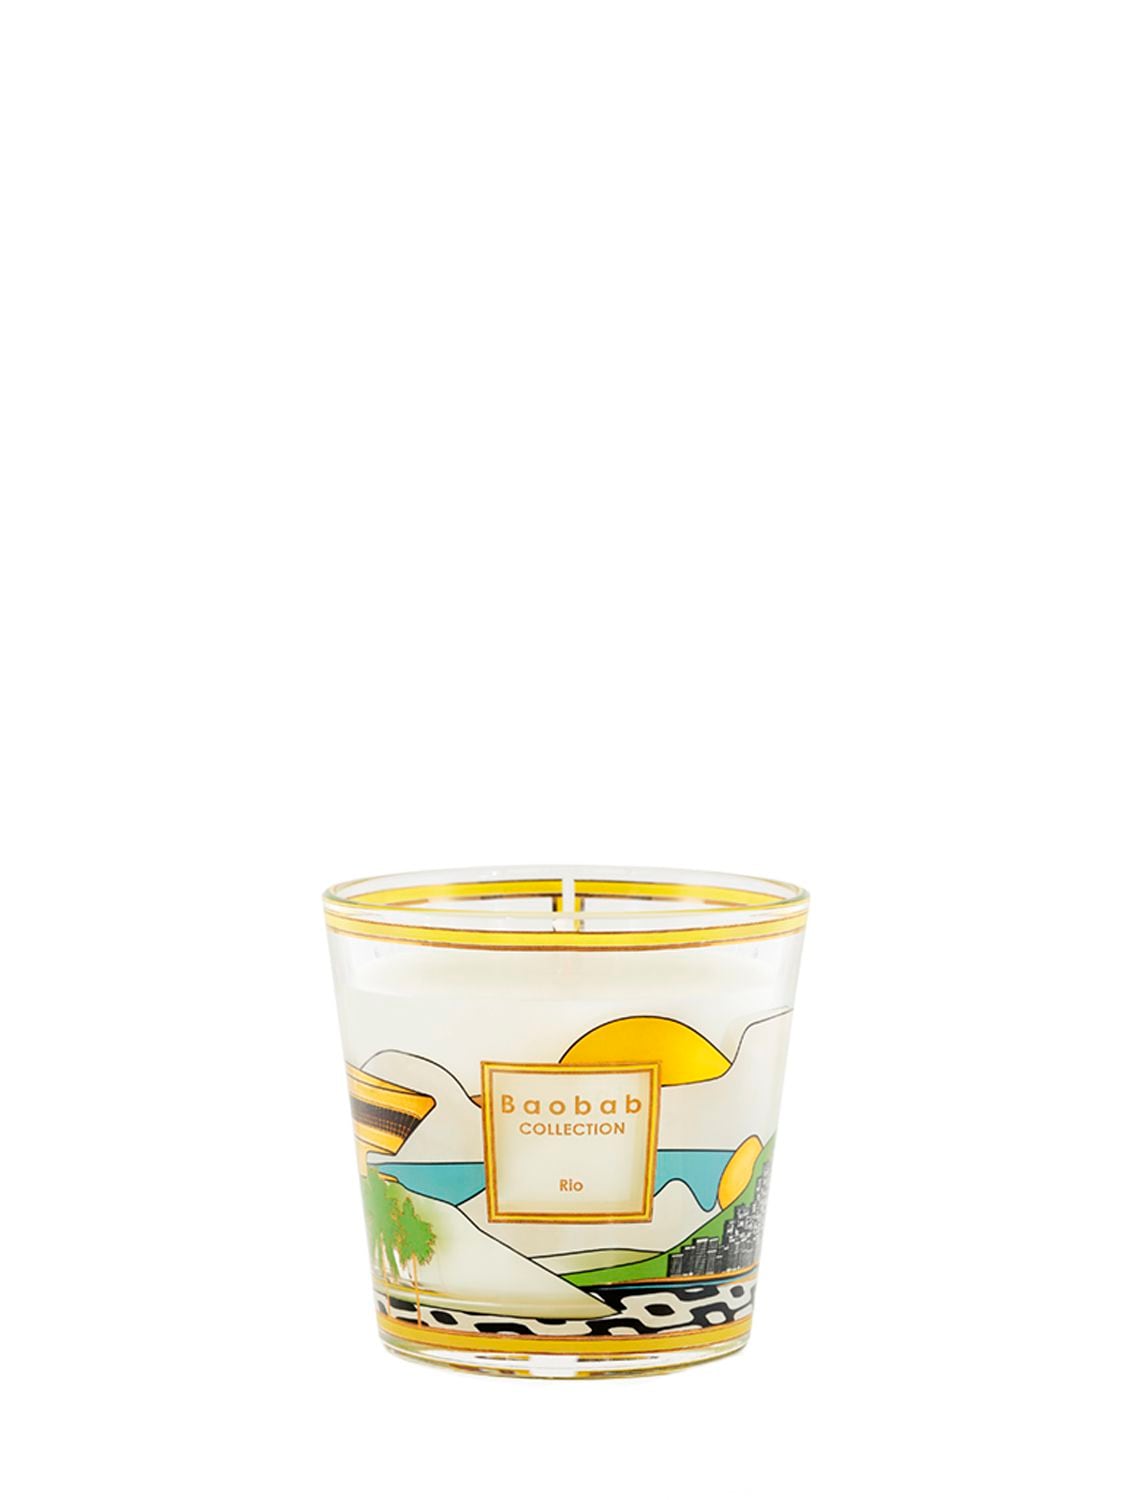 Baobab Collection Rio My First Baobab Candle In Multicolor